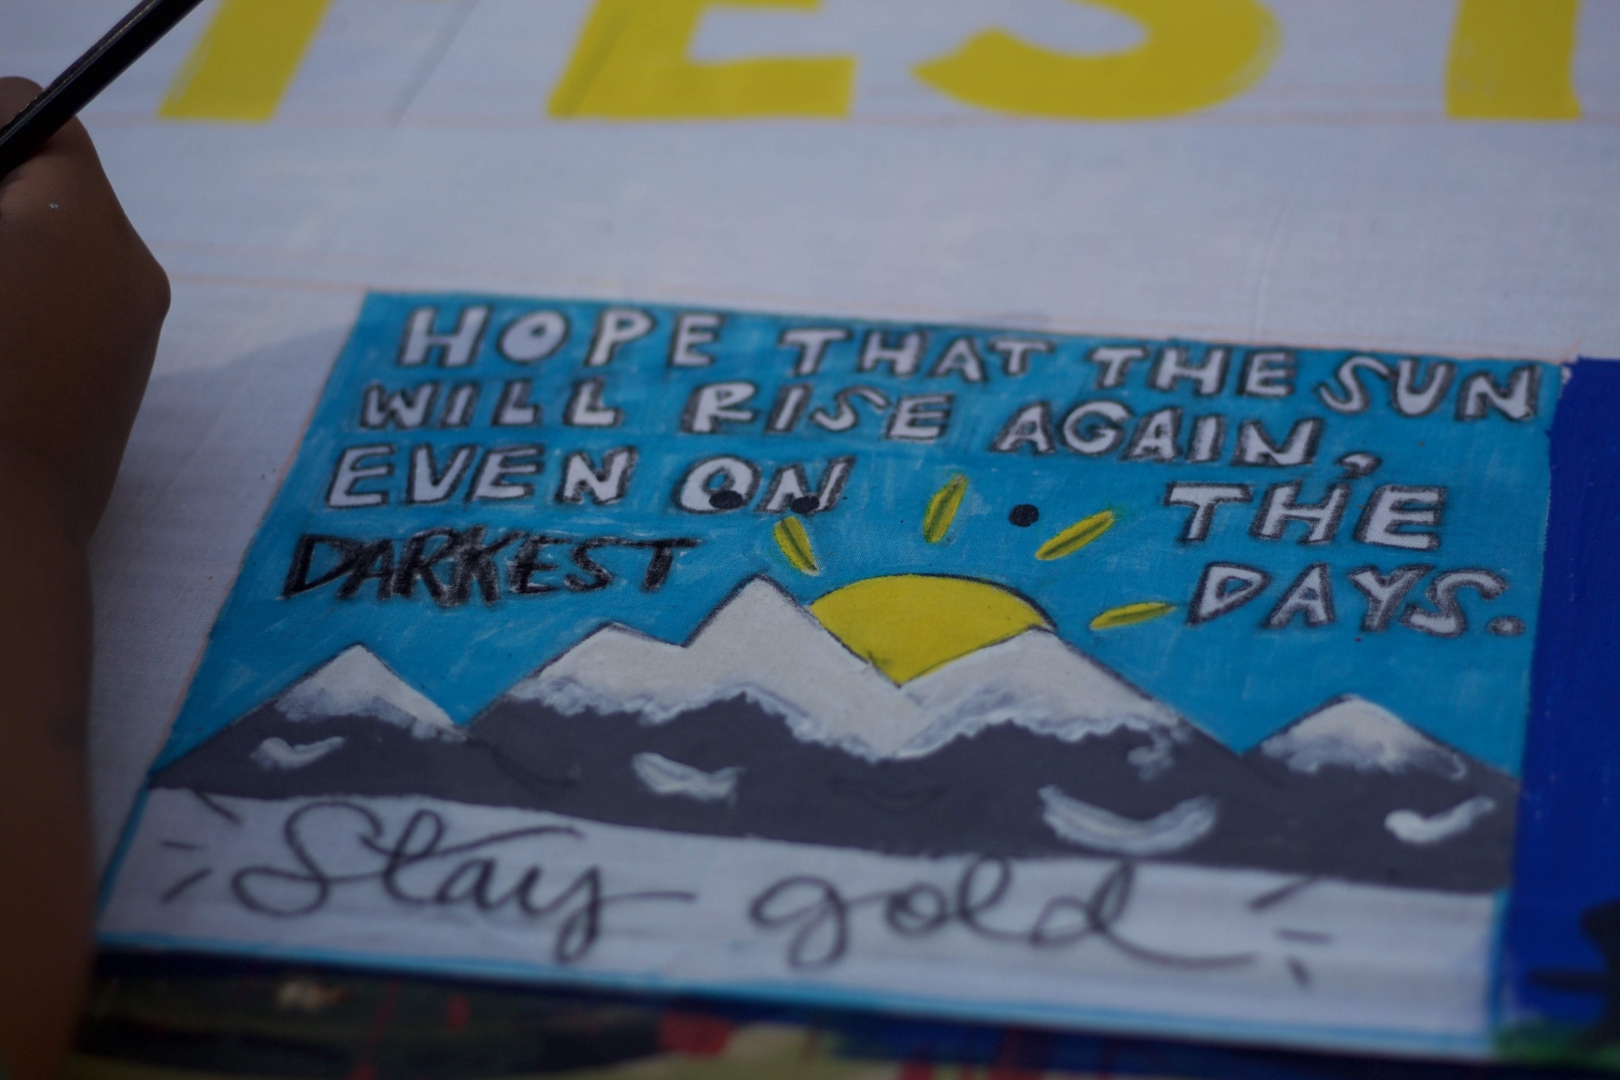 The phrase "Hope that the sun will rise again, even on the darkest days. Stay gold" is painted on a backdrop of snow-capped mountains with a sun rising behind them.